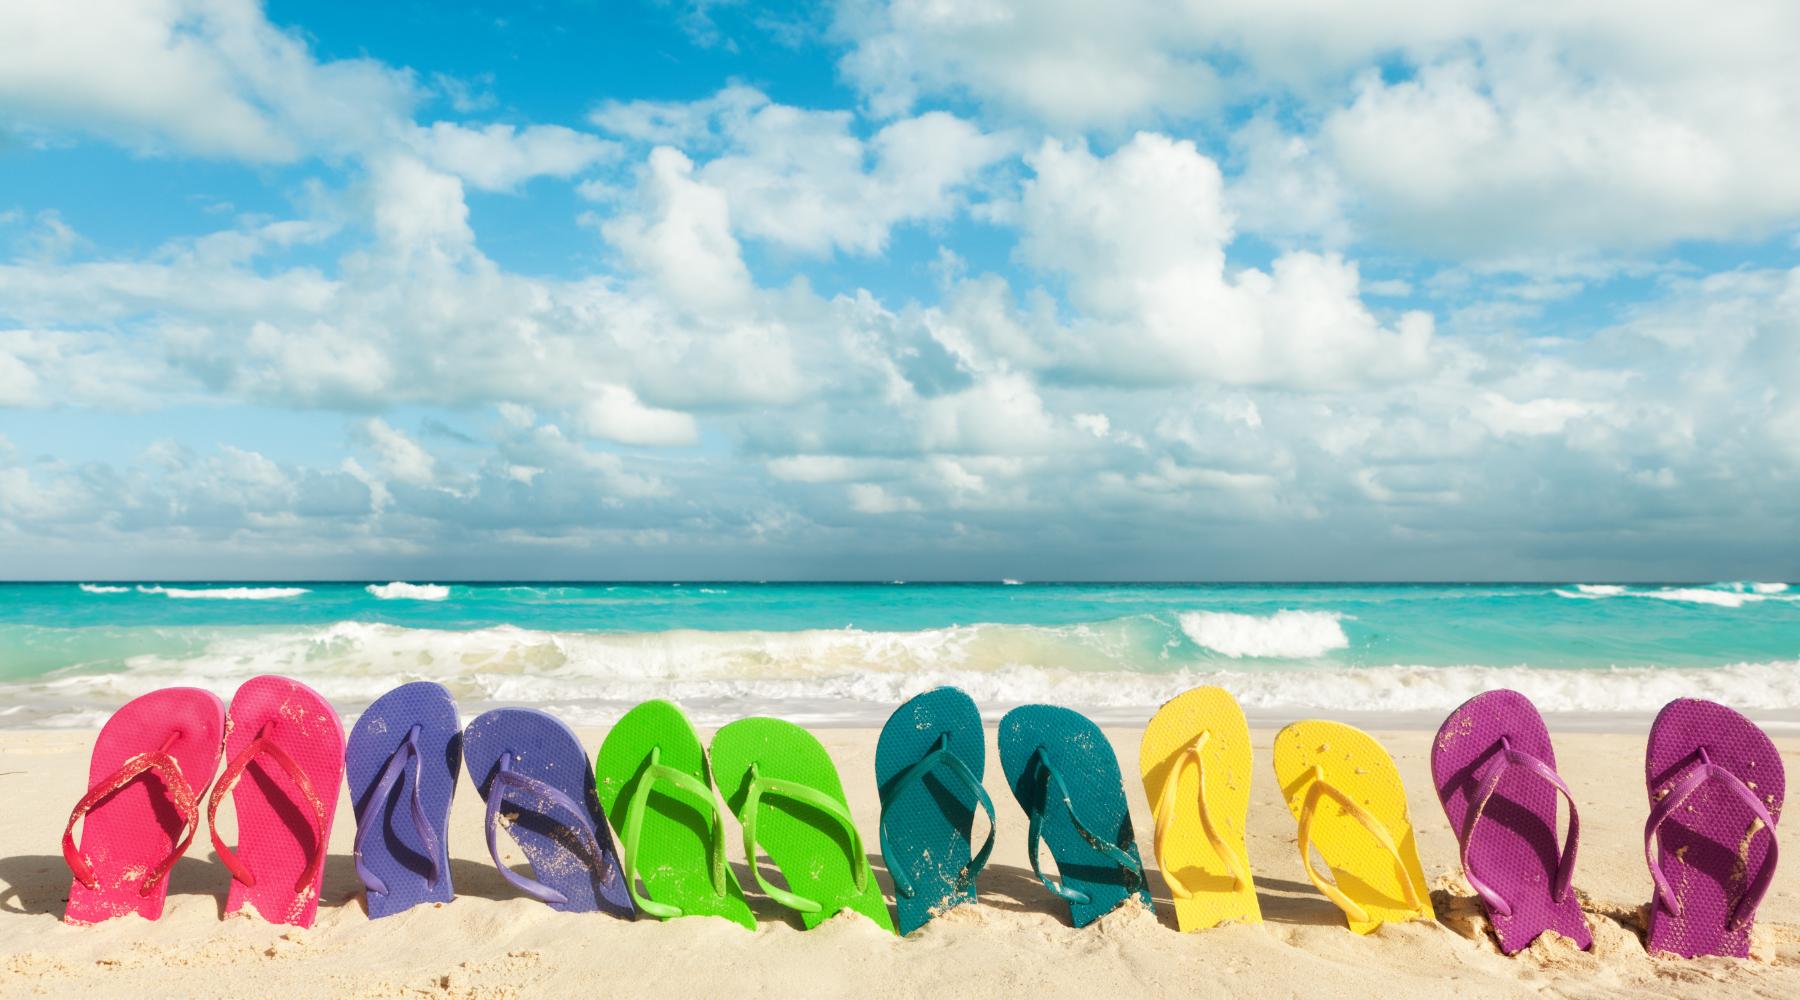 Stay Safe during Spring break - a row of flip flops on a sandy beach. 